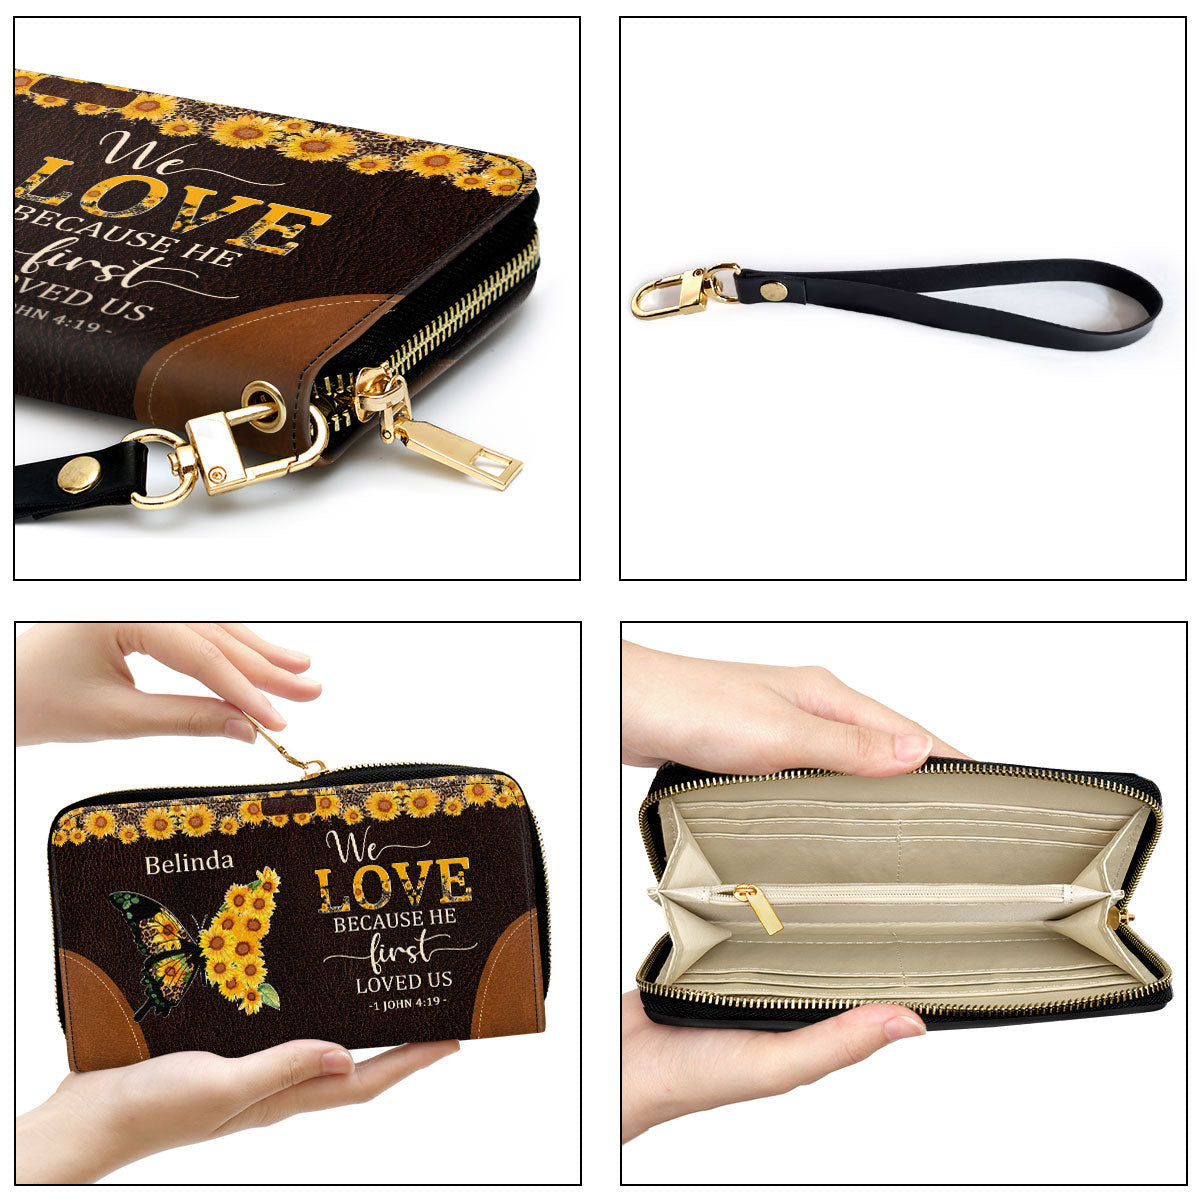 We Love Because He First Loved Us Clutch Purse For Women - Personalized Name - Christian Gifts For Women